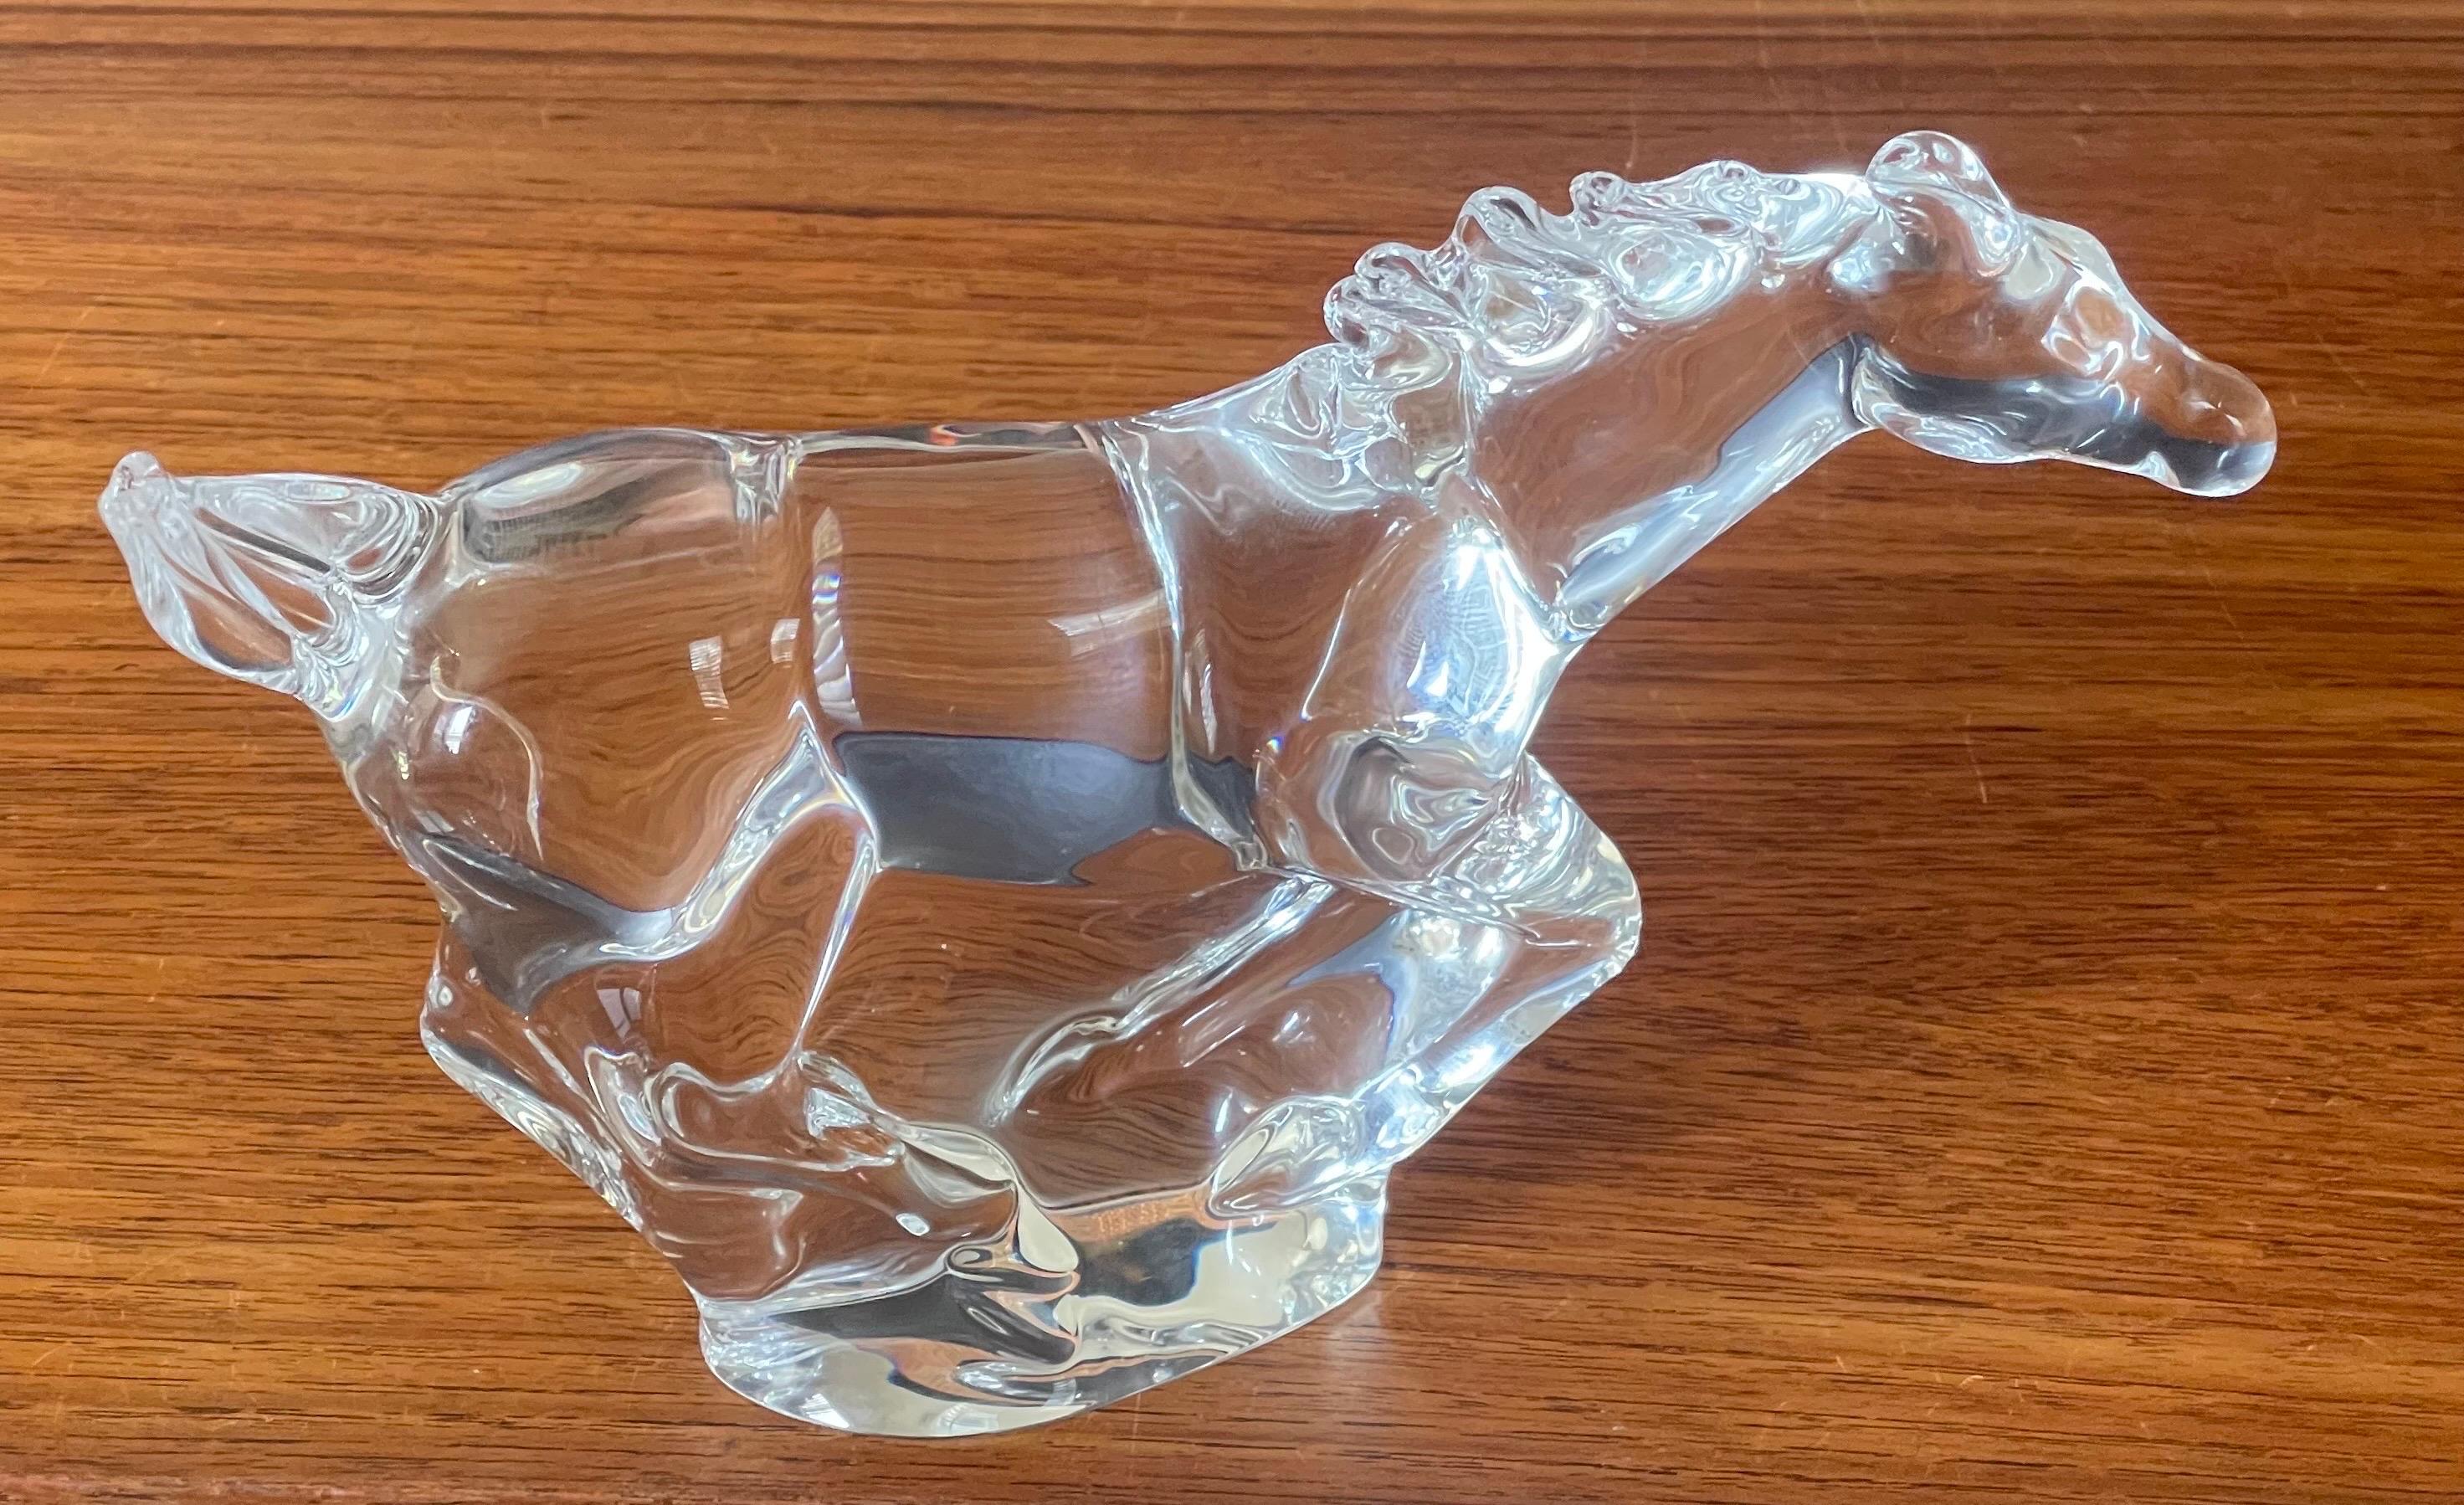 American Crystal Galloping Horse / Mustang Sculpture by Steuben Glassworks For Sale